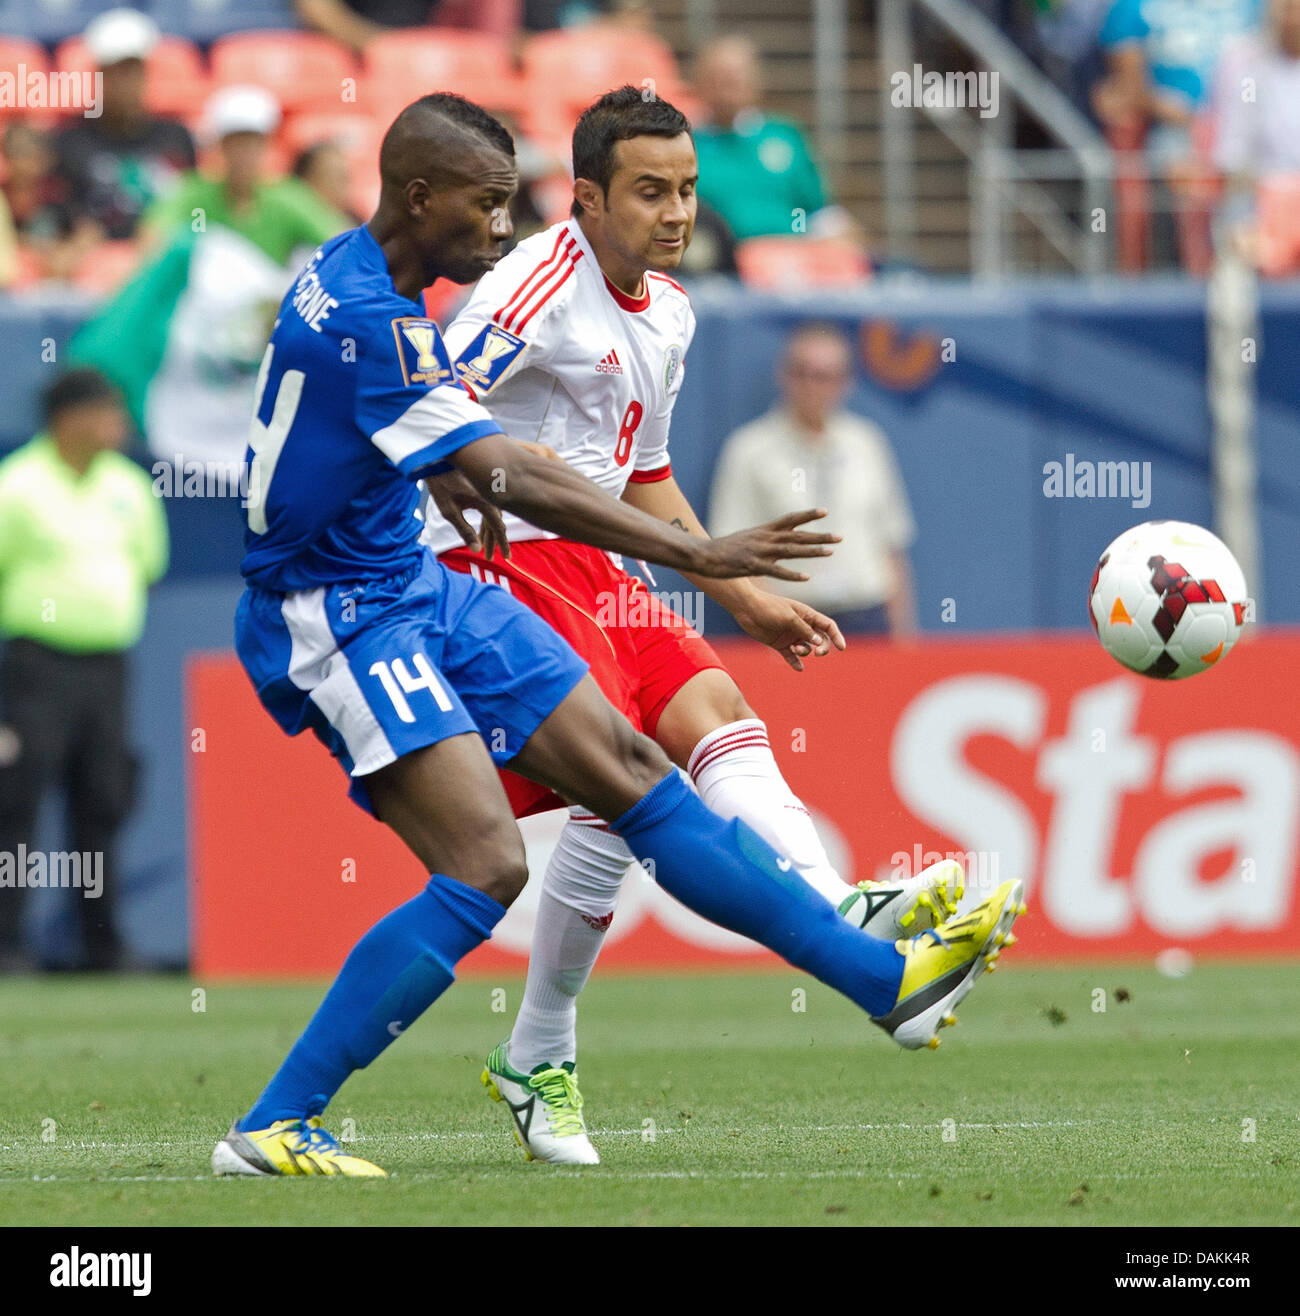 July 14, 2013 - Denver, Colorado, U.S - Mexico's LUIS MONTES, right, battles for the ball with Martinique's FABRICE REUPERNE, left, during the 2nd. half at Sports Authority Field at Mile High Sunday afternoon. Mexico defeats Martinique 3-1. (Credit Image: © Hector Acevedo/ZUMAPRESS.com) Stock Photo